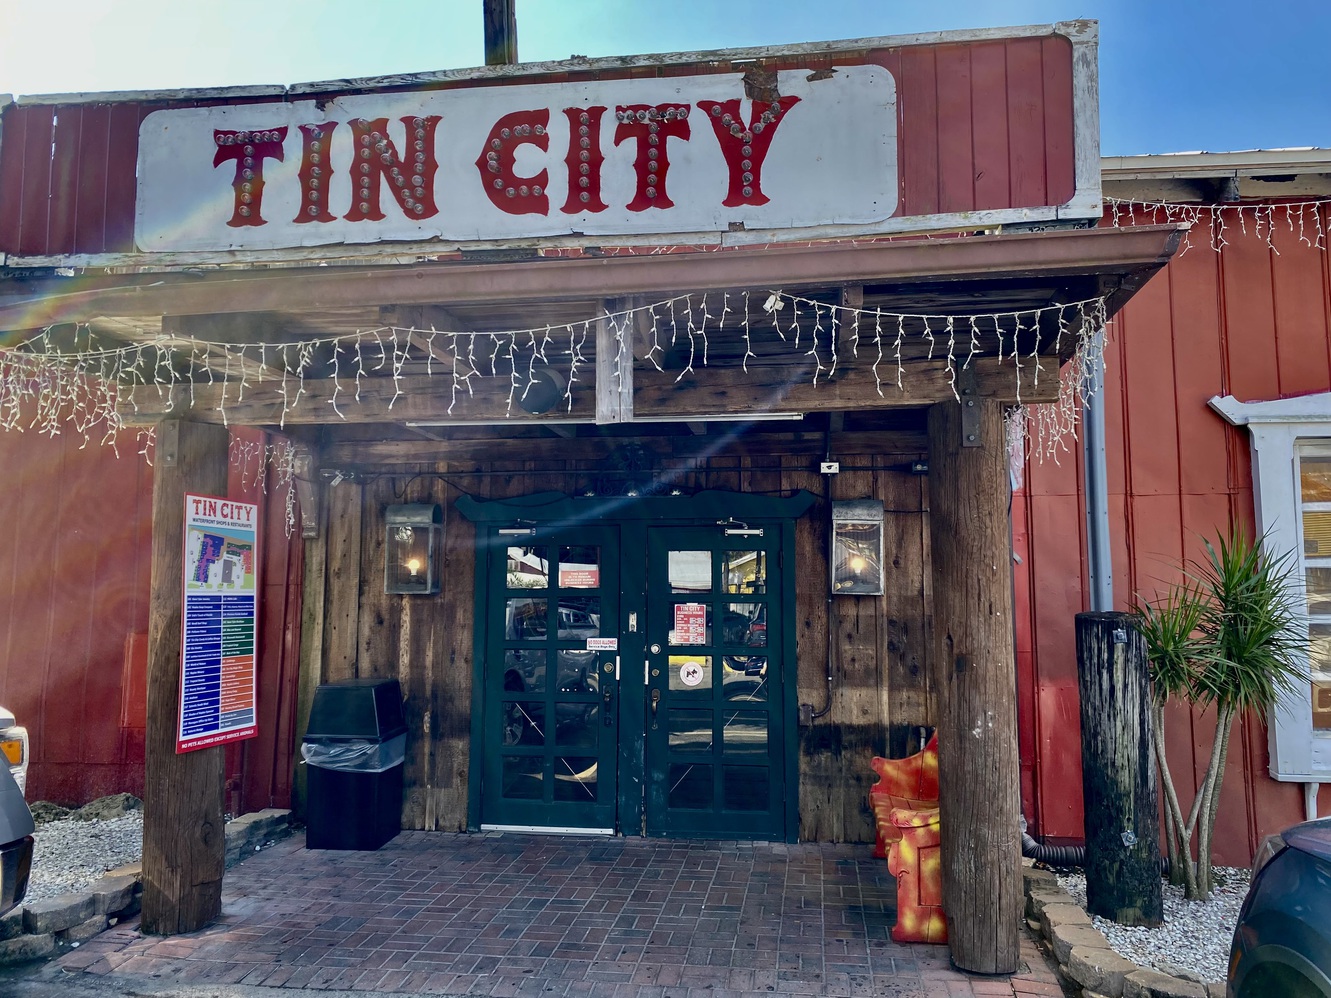 This is an entrance to Tin City near the Magic Shop.